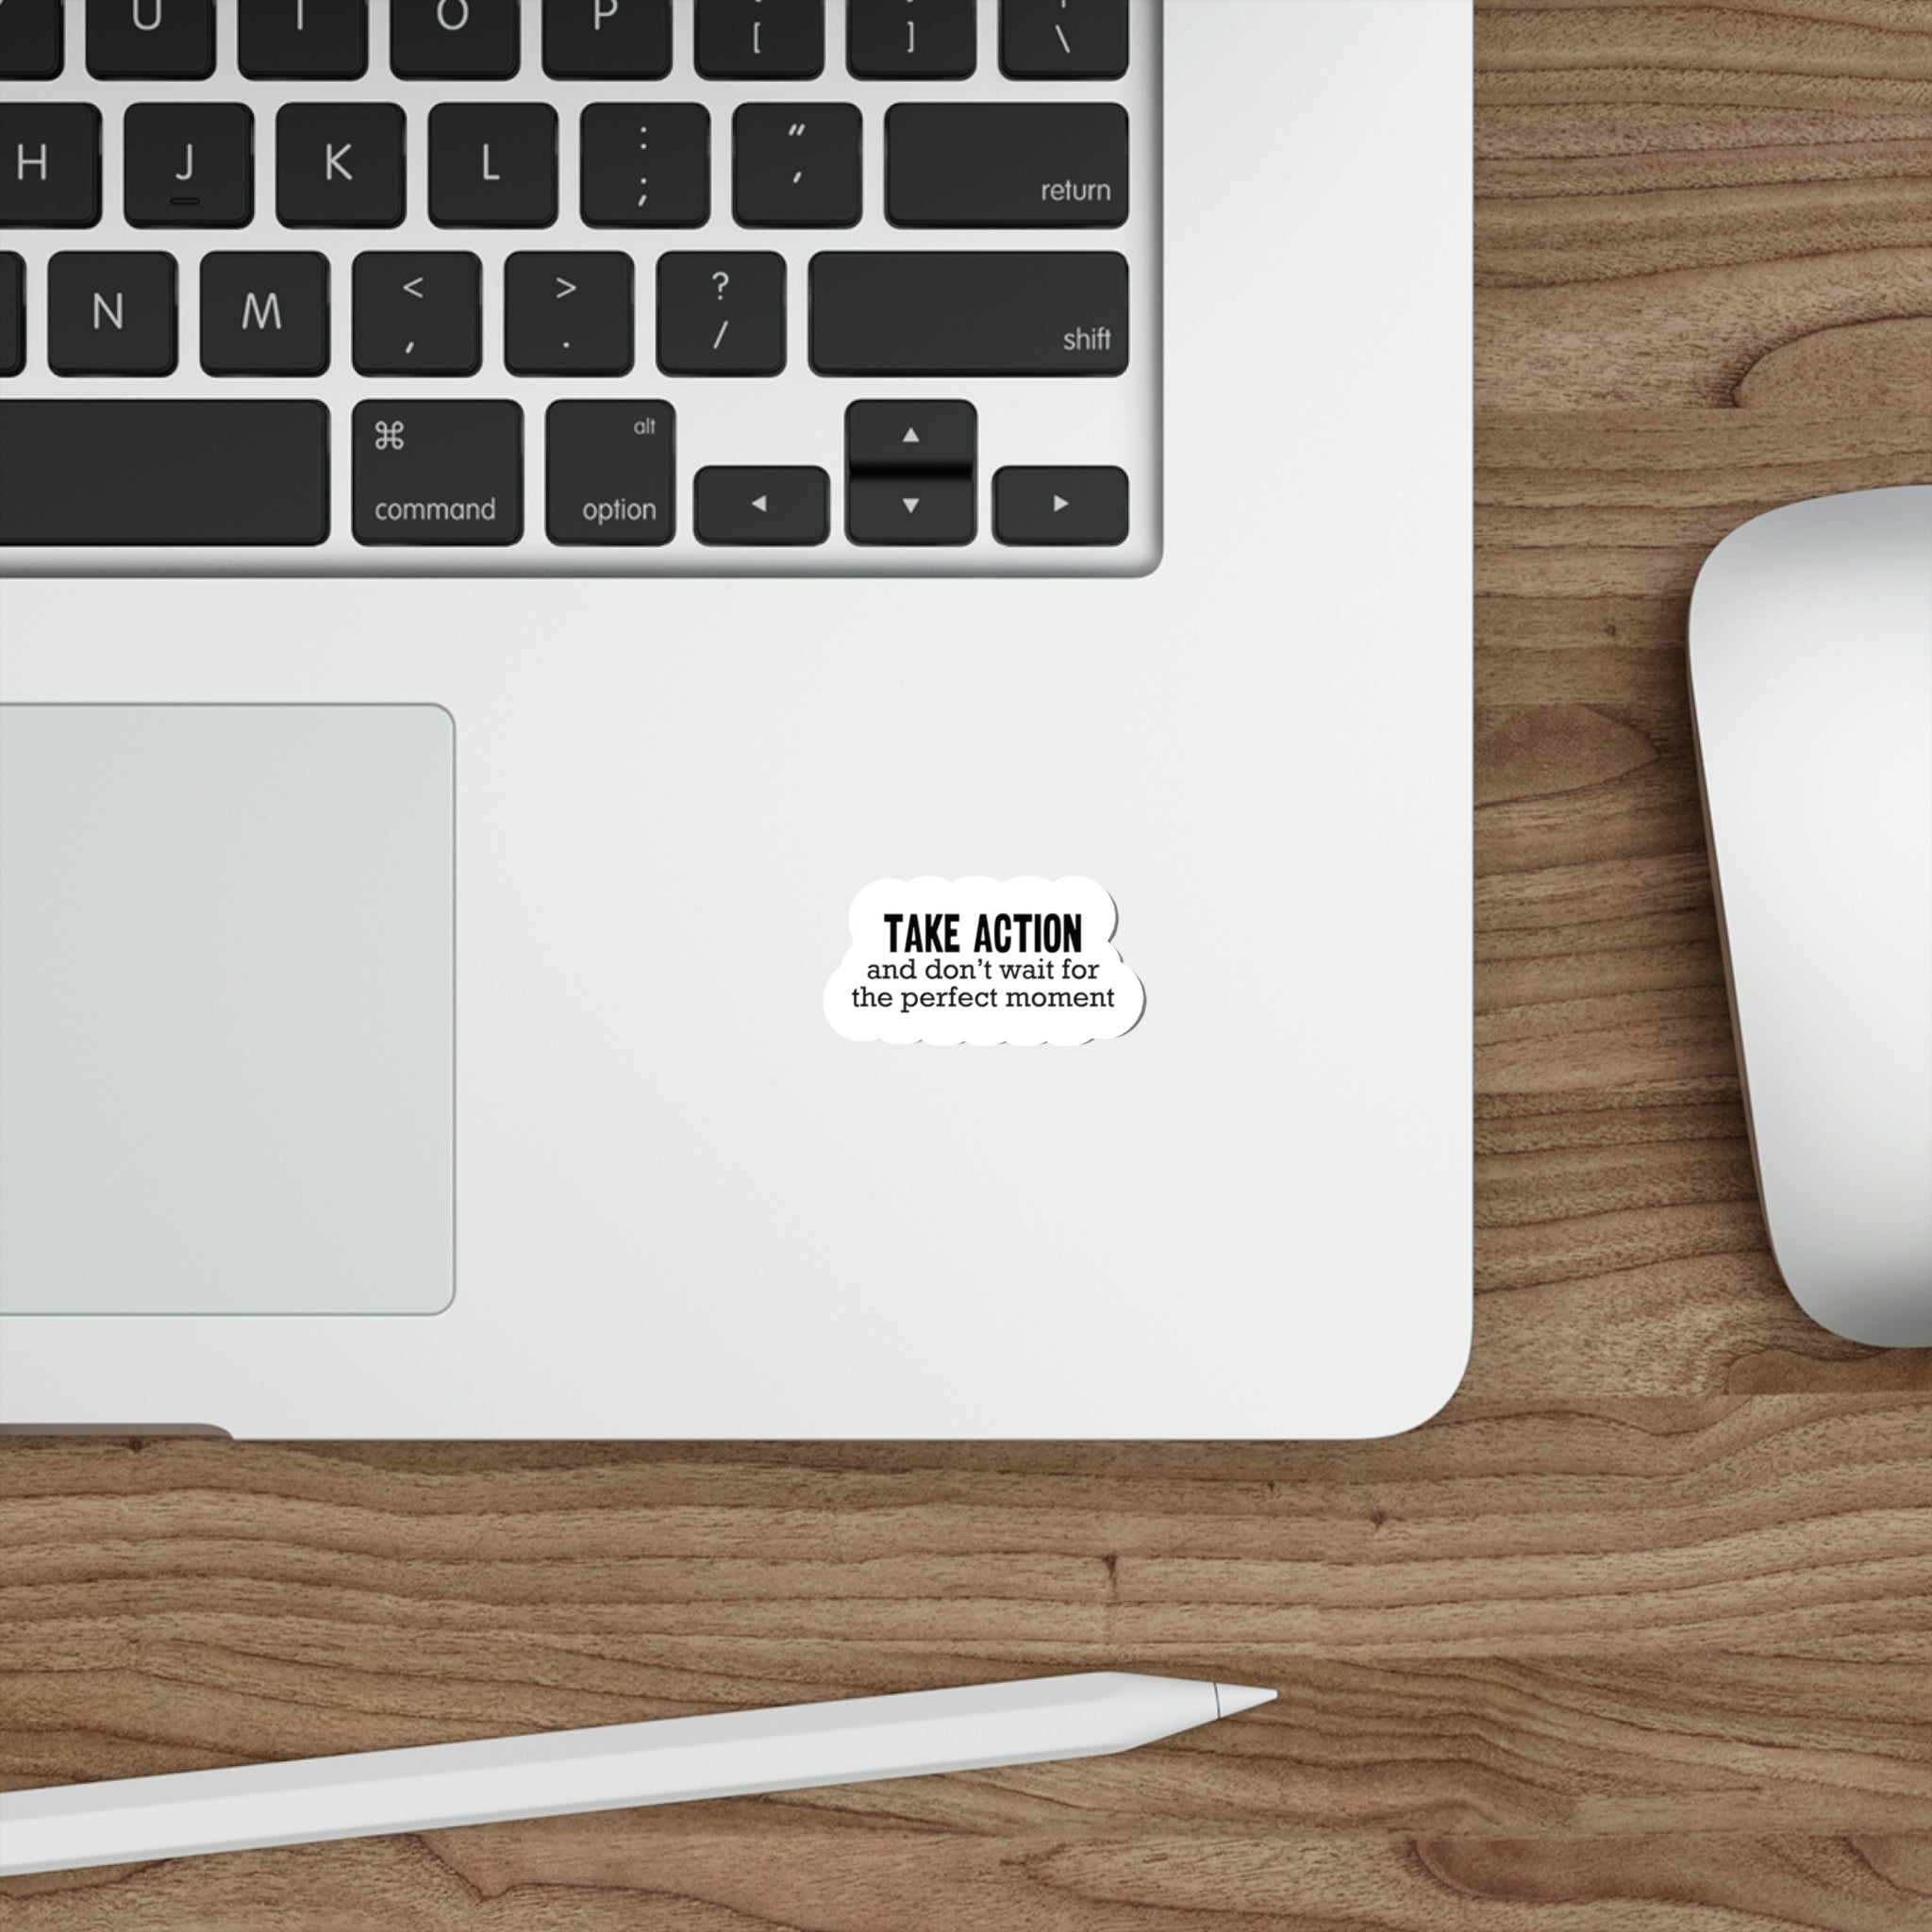 Take action and don't wait for the perfect moment Sticker #size_2x2-inches